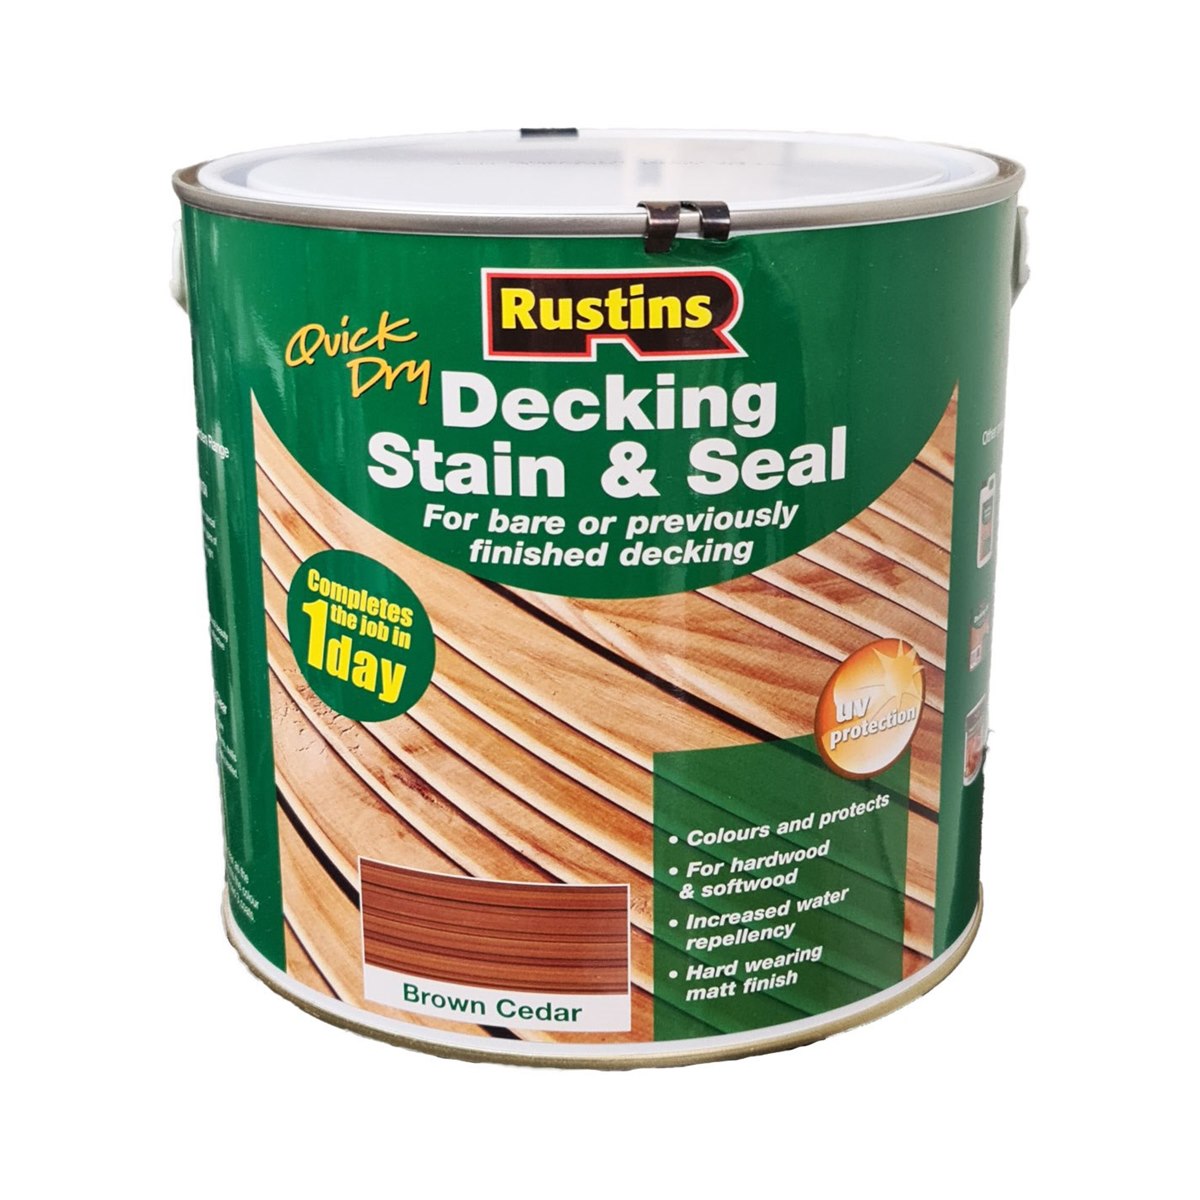 Rustins Quick Dry Decking Stain and Seal Brown Cedar 2.5 Litre